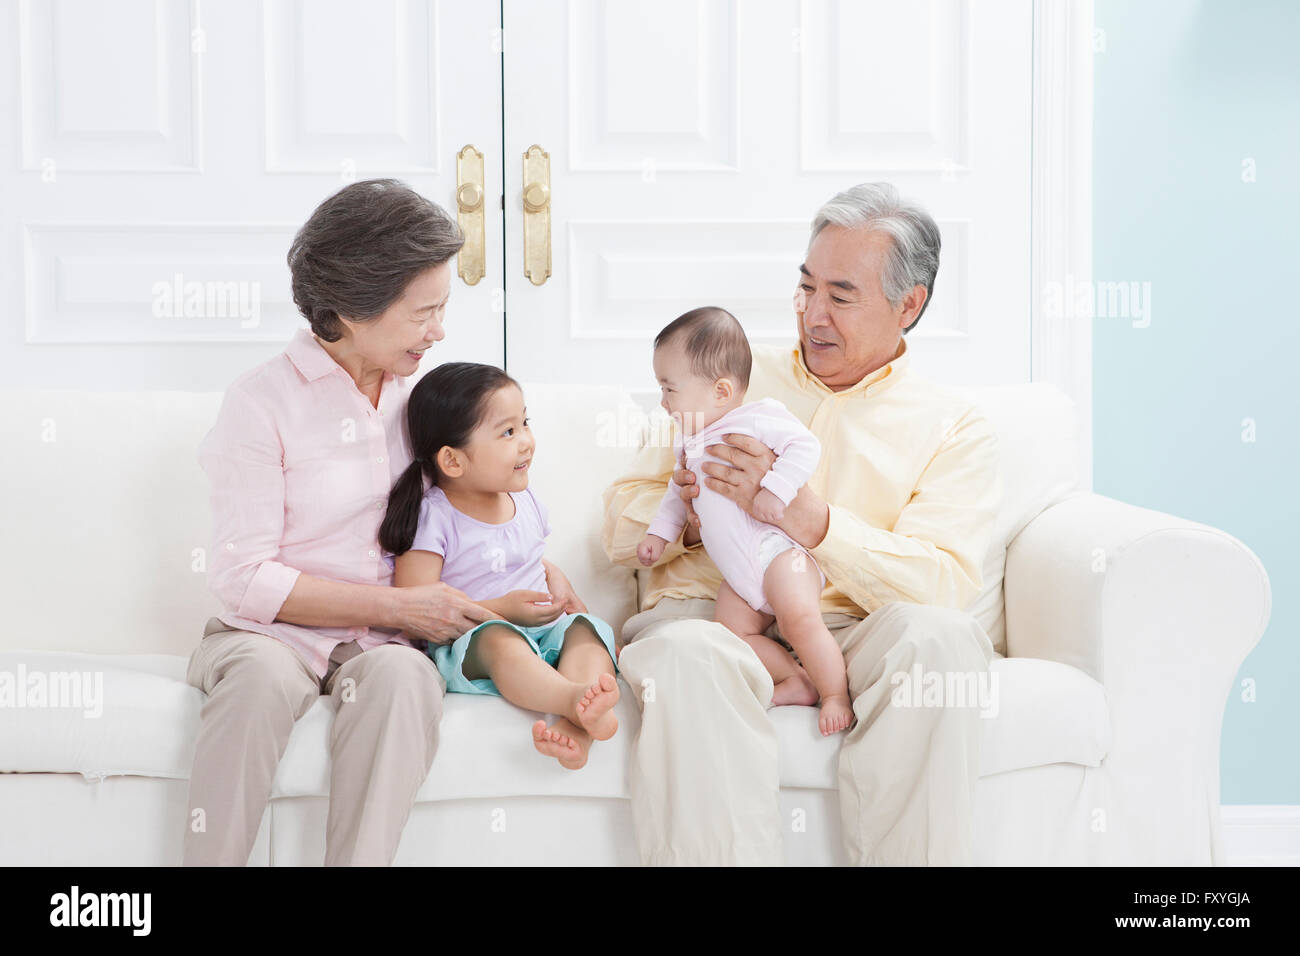 Grandparents being happy with their grandchildren all seated on a couch and smiling Stock Photo